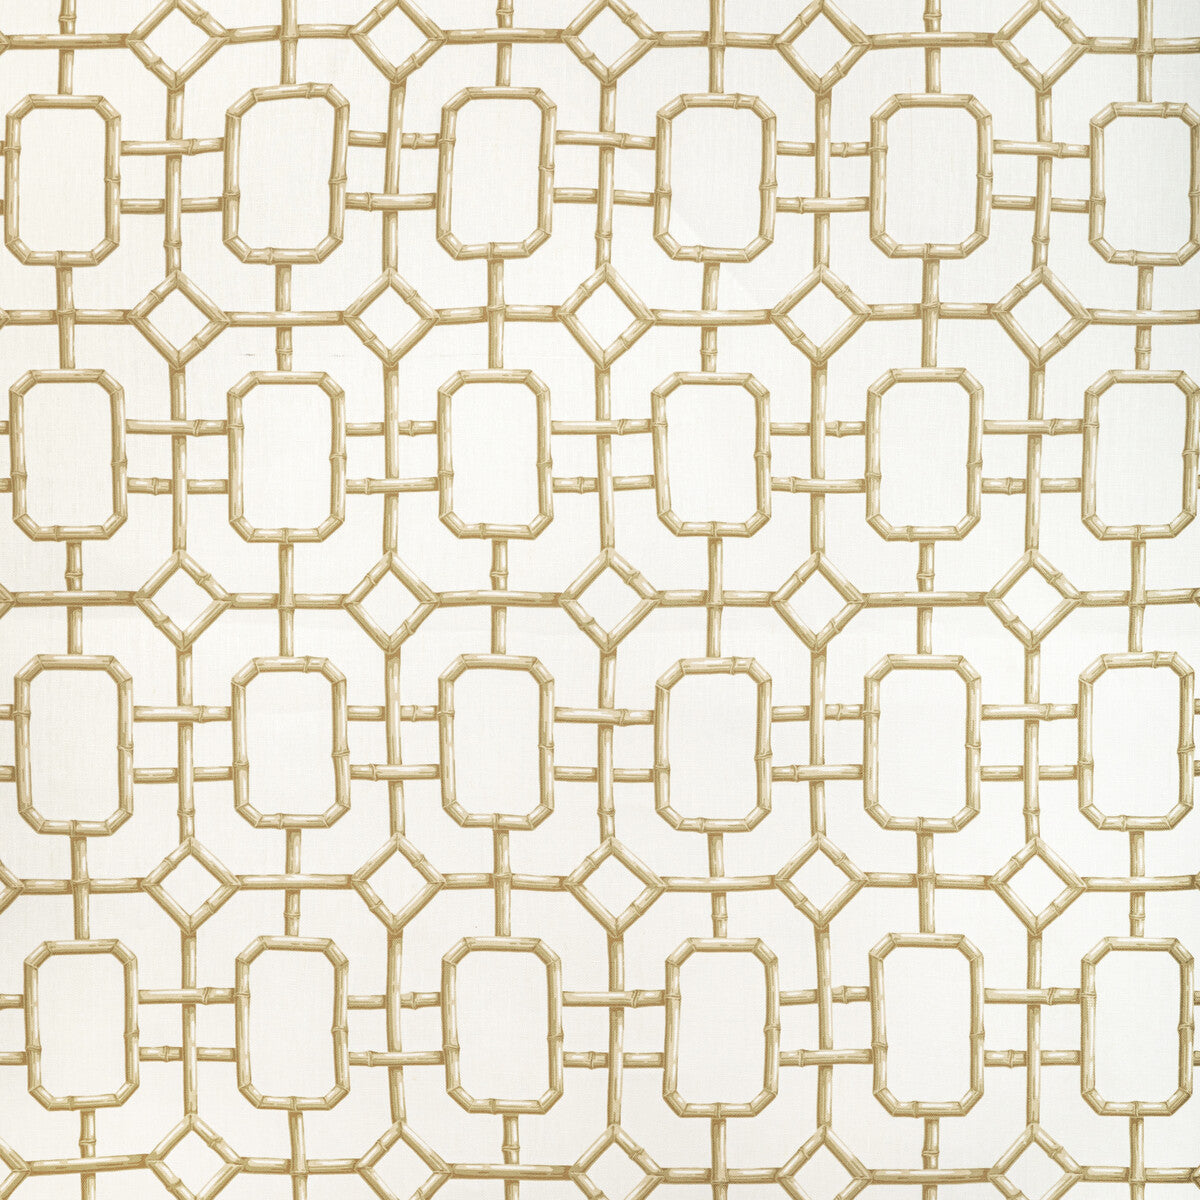 Bambu Fret fabric in dune color - pattern BAMBU FRET.166.0 - by Kravet Couture in the Jan Showers Charmant collection